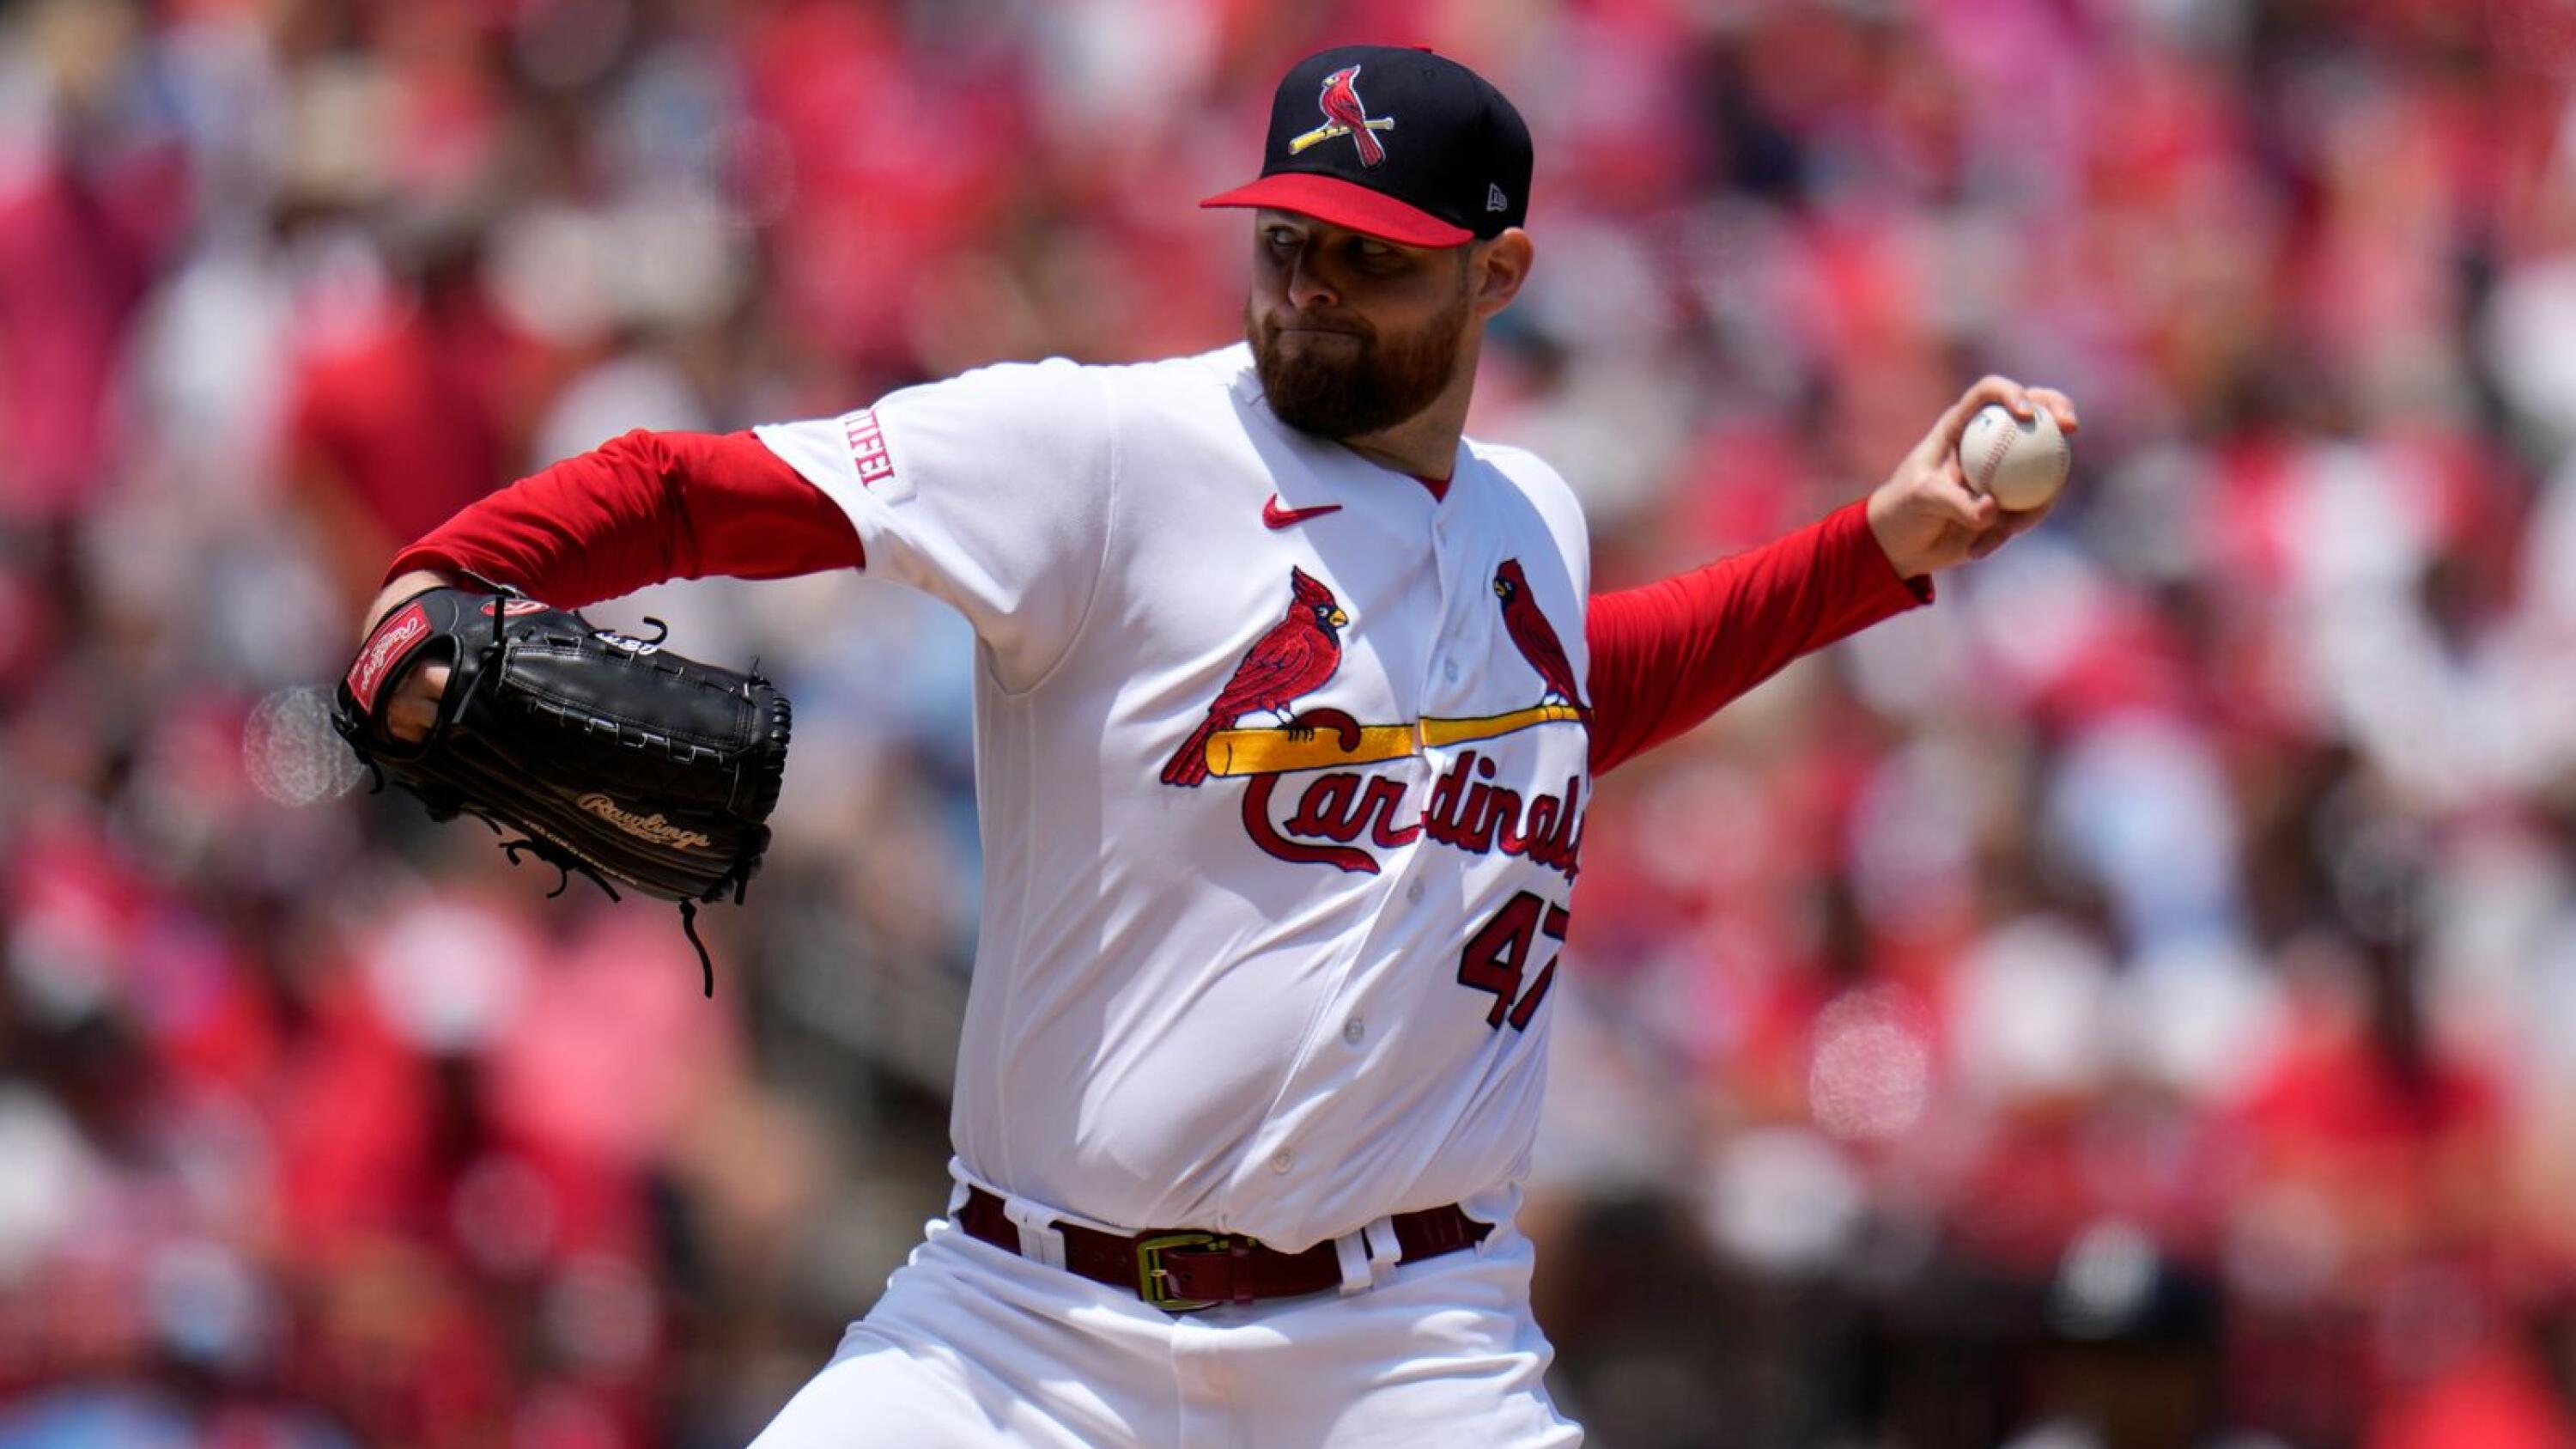 Montgomery beats Yankees for second time as Cards roll 5-1